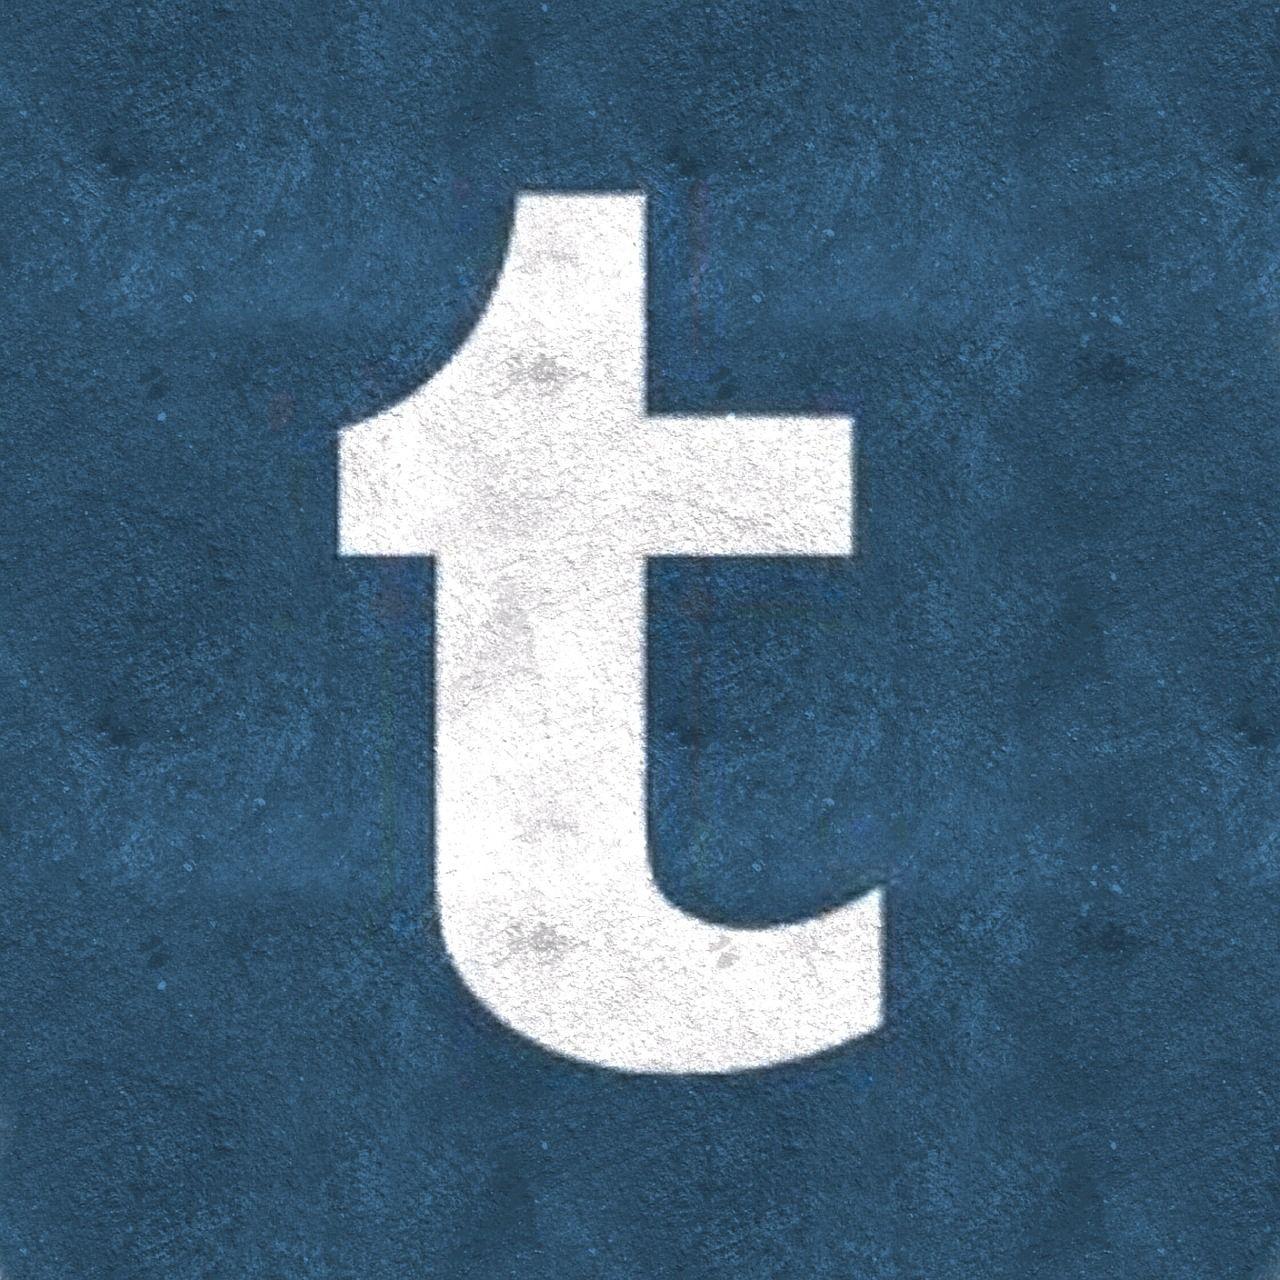 Tumblr Old Logo - Don't Like The New Tumblr Interface? Switch Back To The Old One